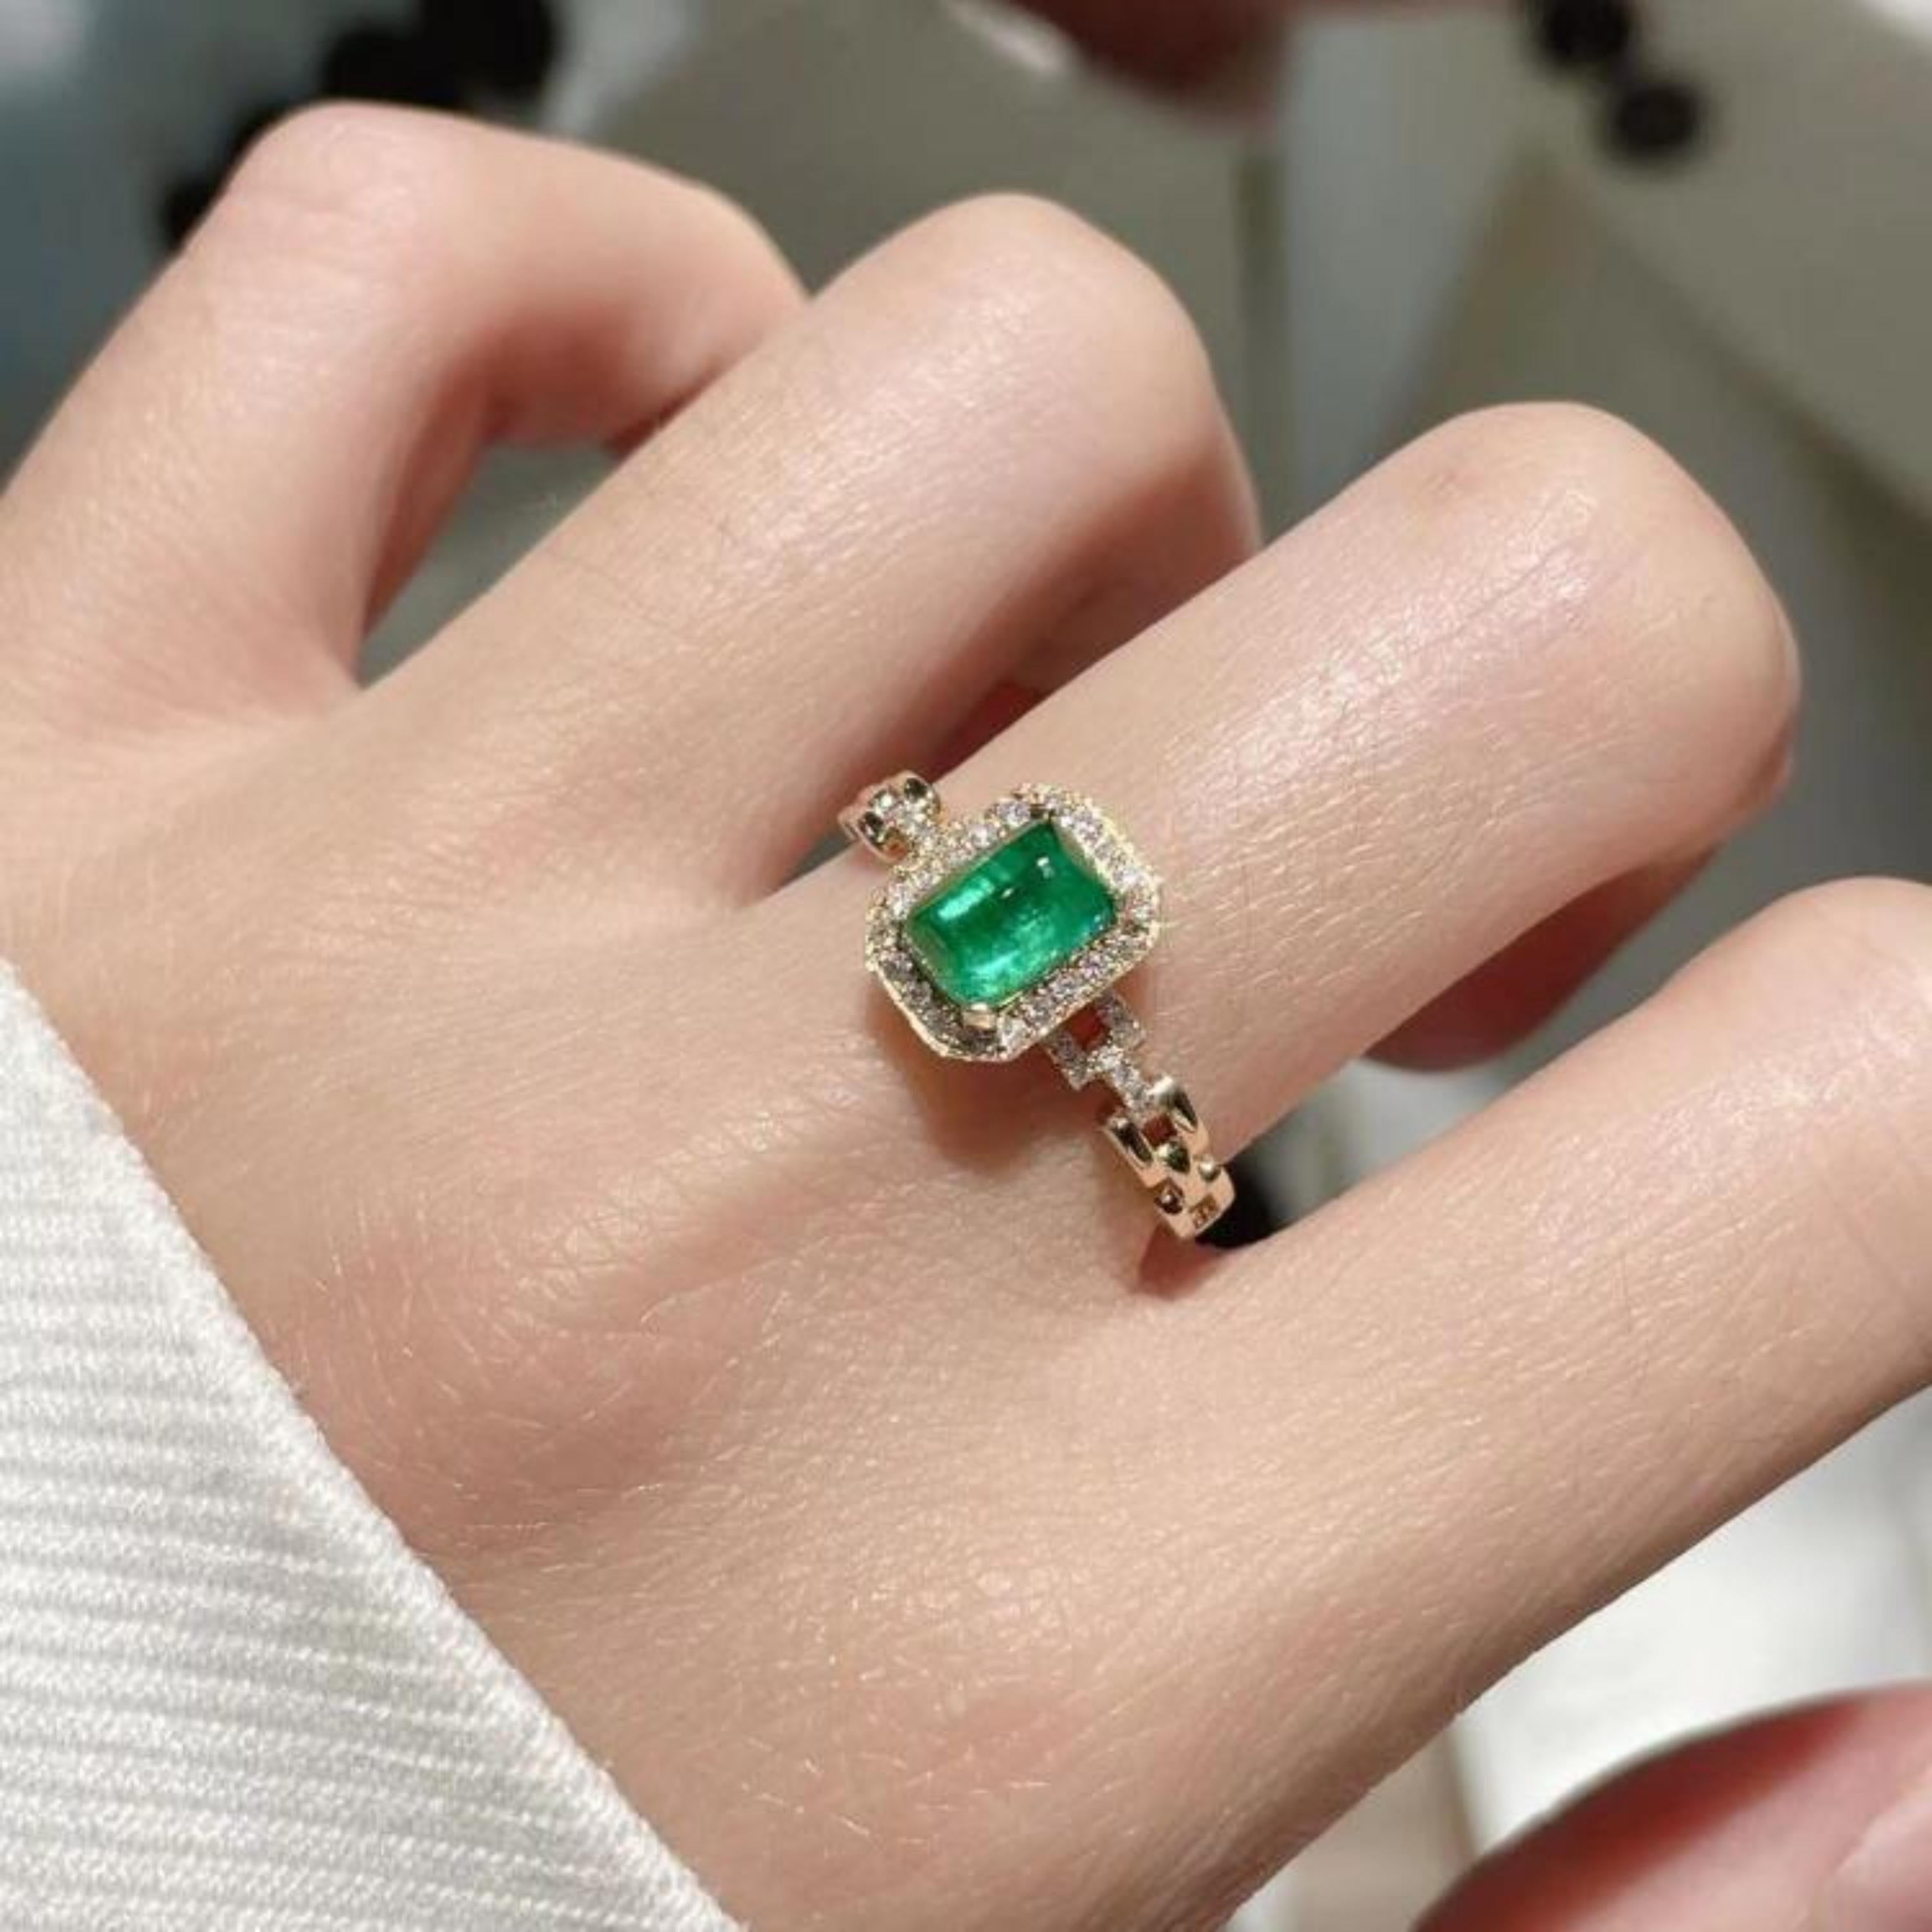 1ct emerald engagement ring